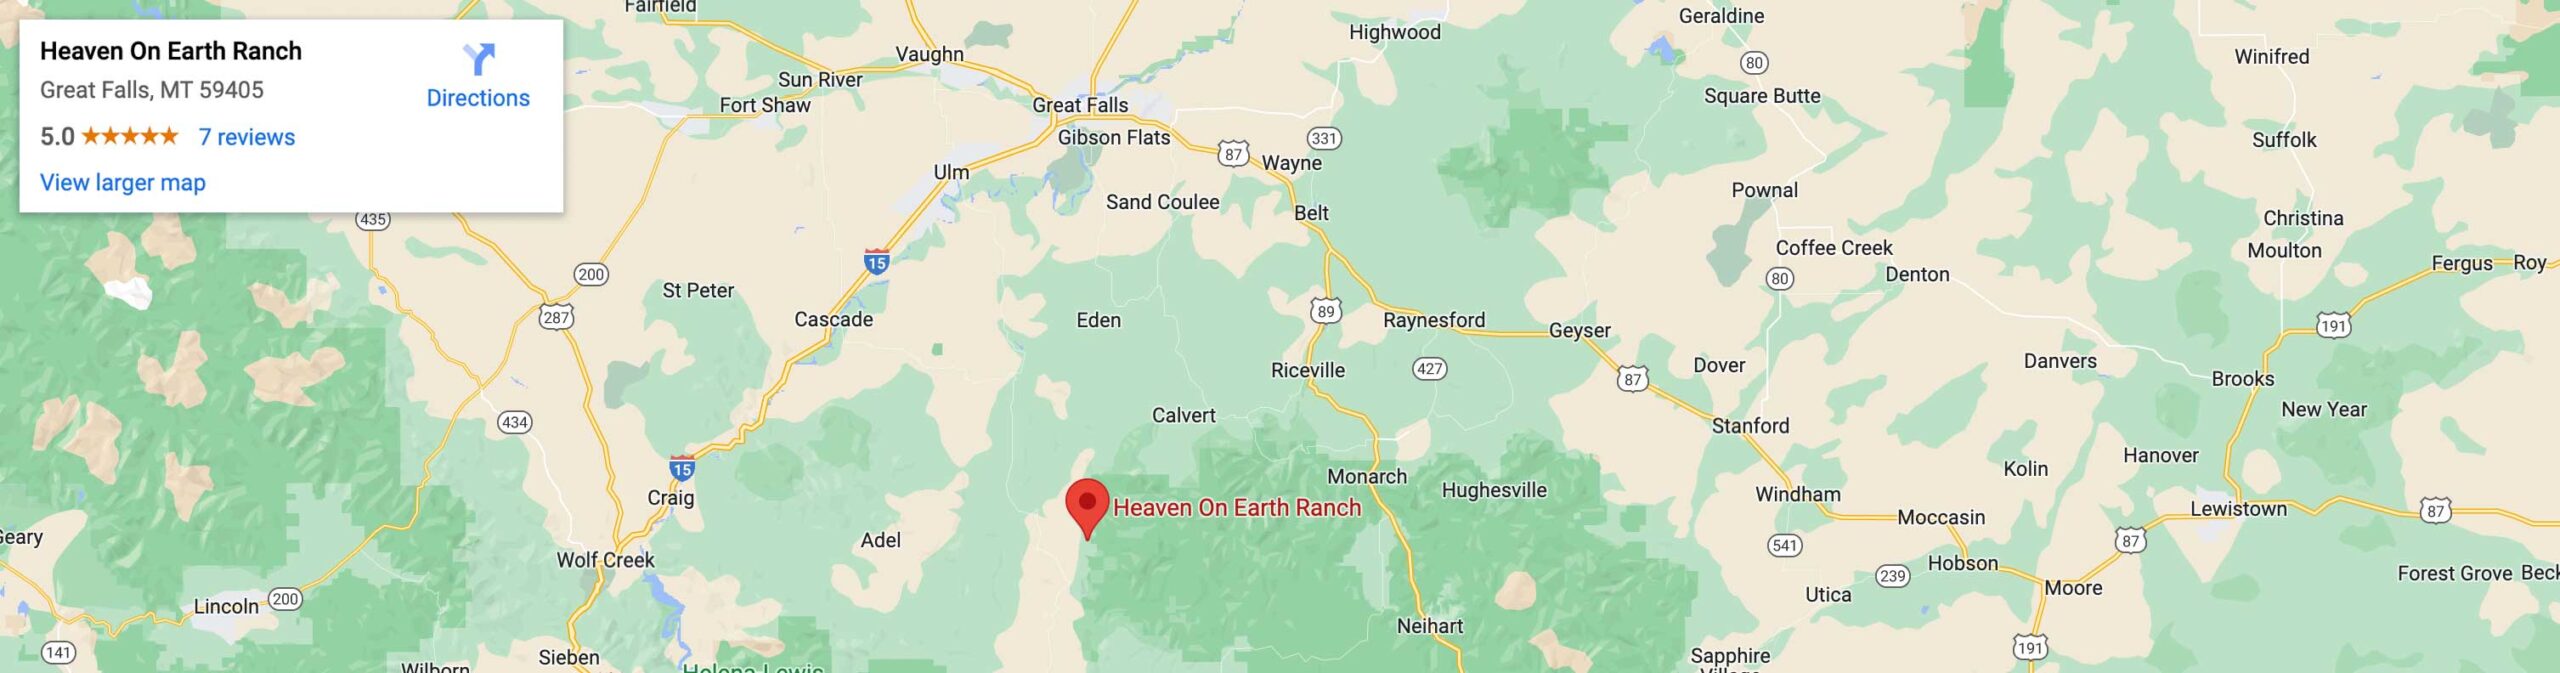 Heaven on Earth Ranch - small map